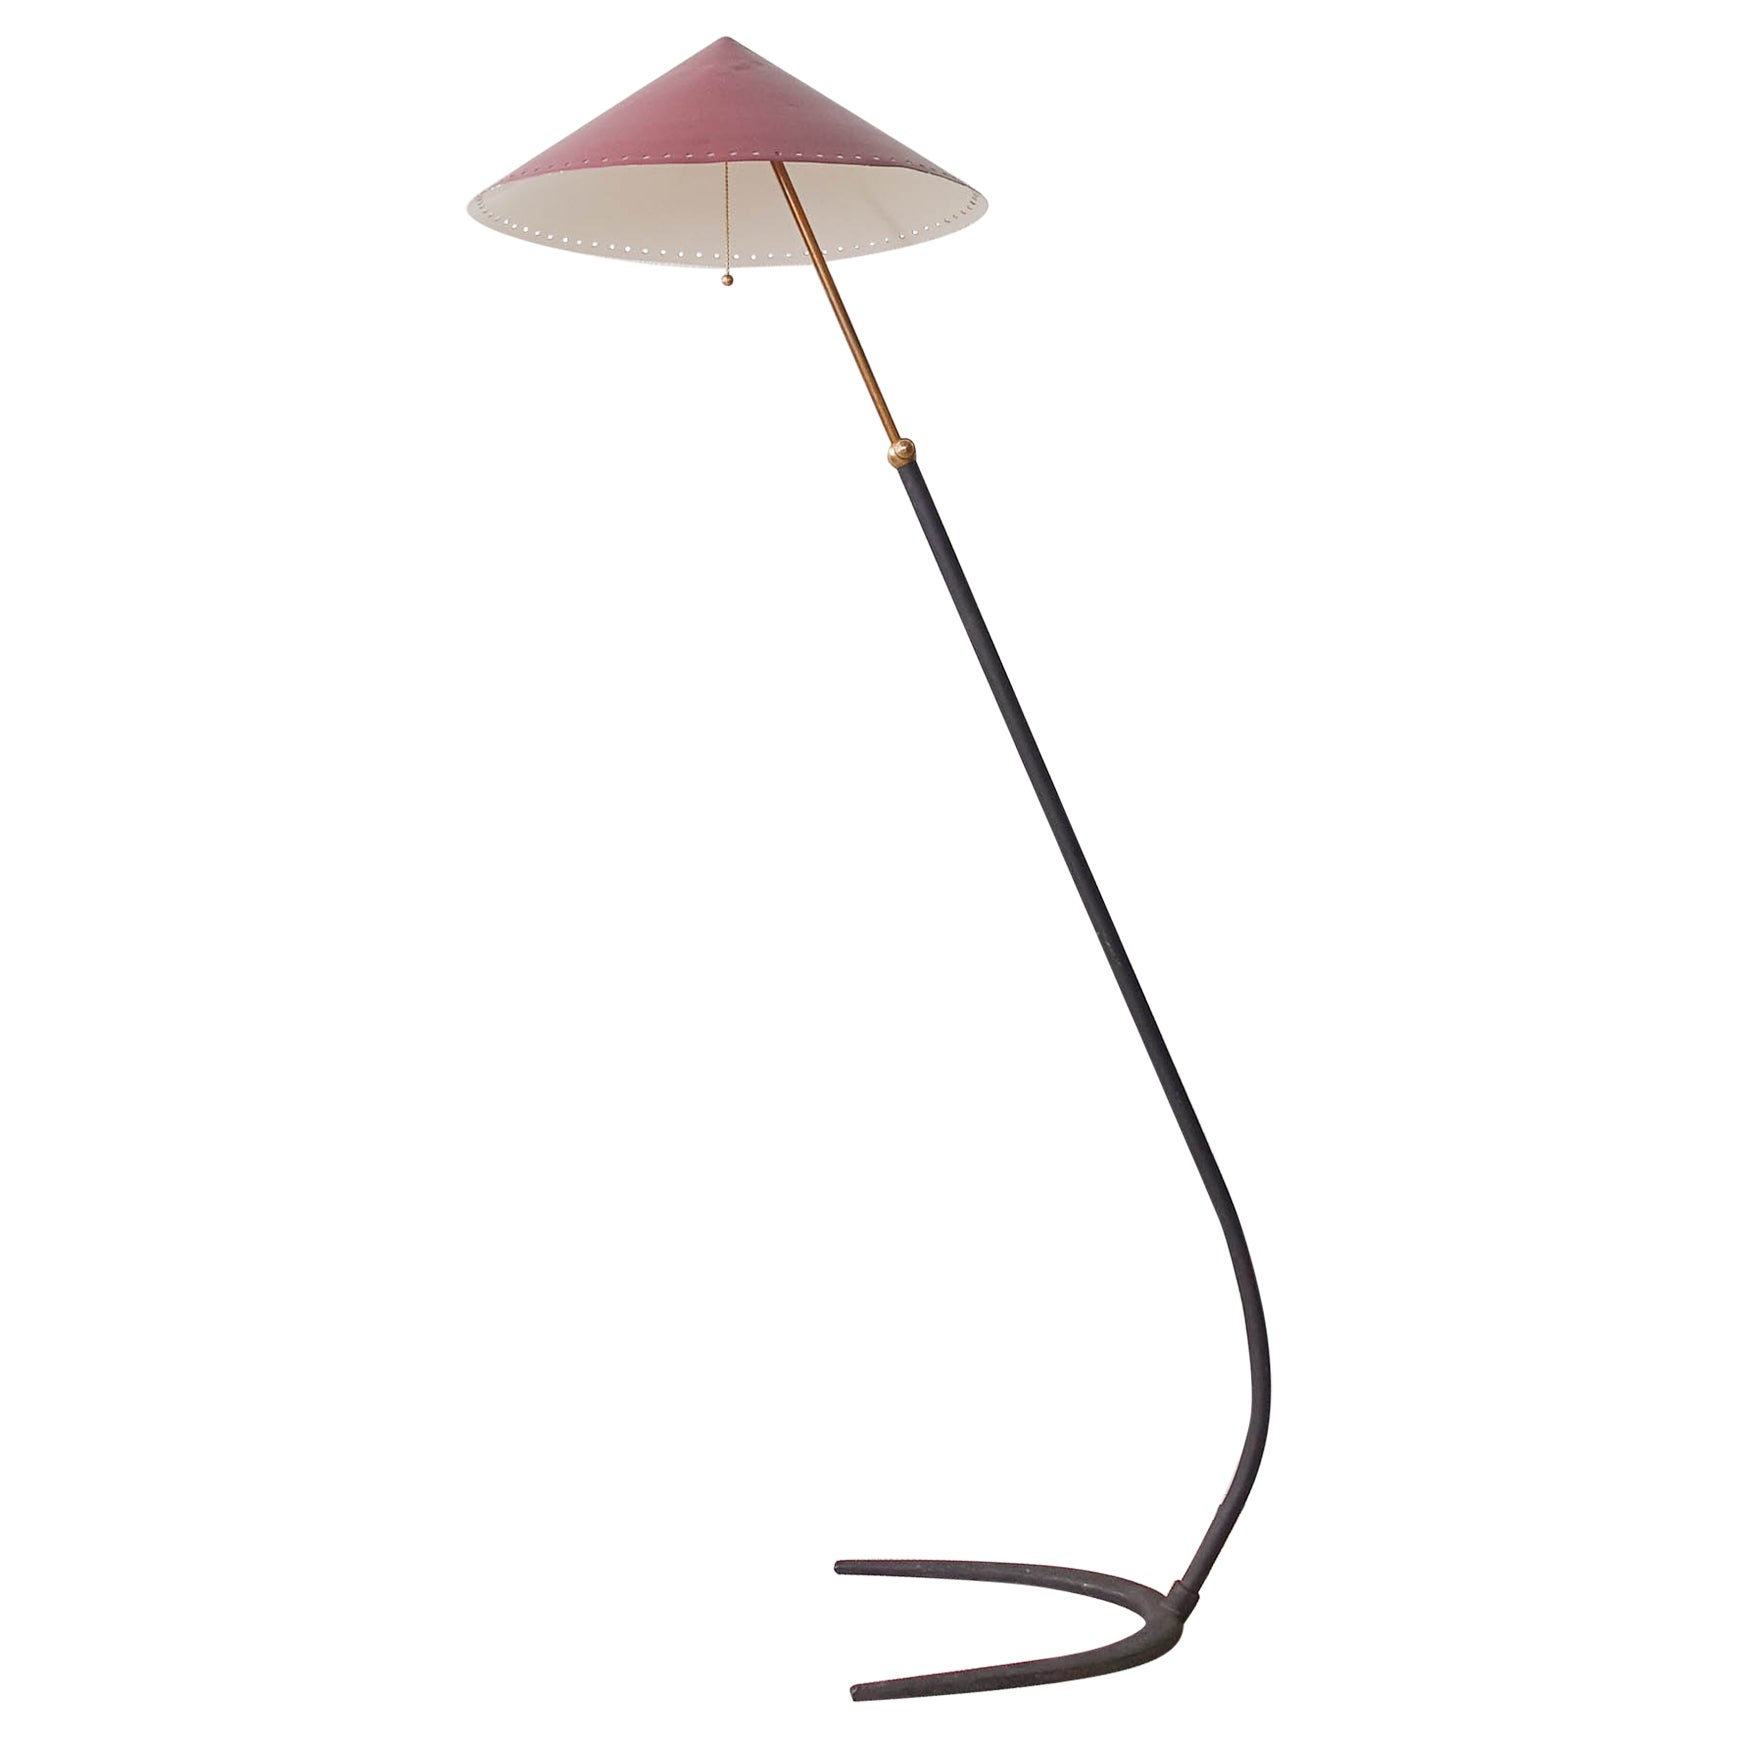 Vintage Italian Chinese Hat Floor Lamp, 1950's For Sale